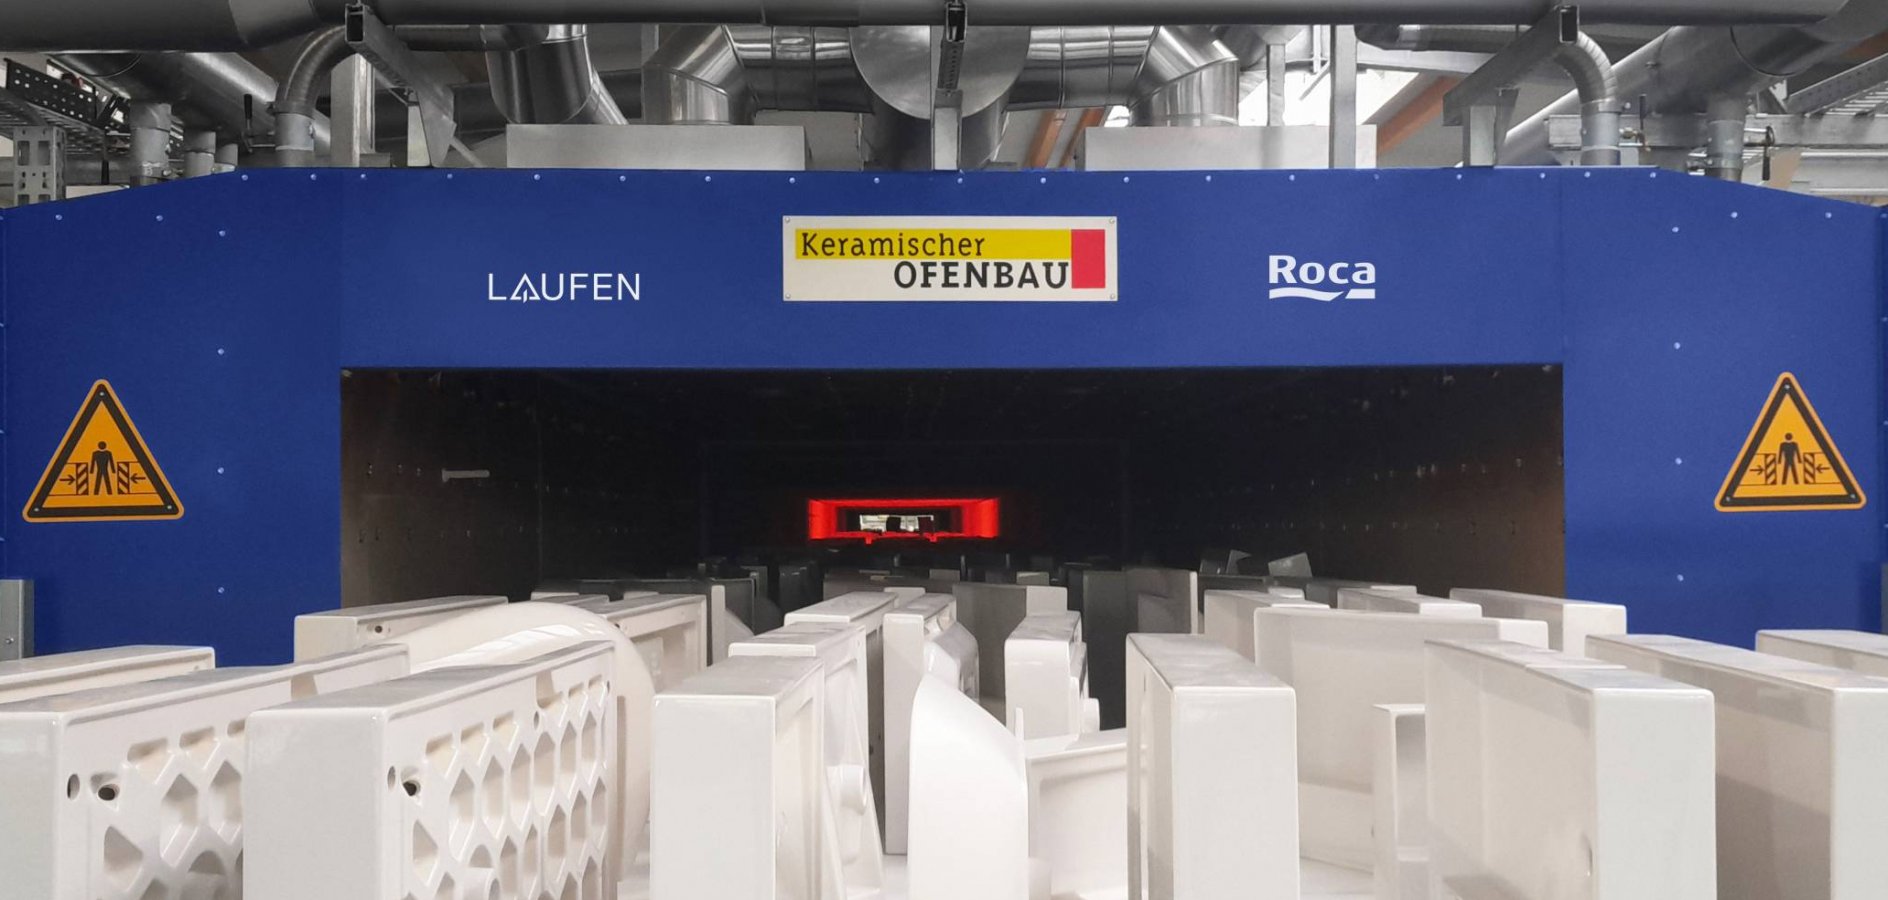 LAUFEN, Roca Group, Keramischer Ofenbau, Gmunden, world’s first CO2-free electric kiln, industrial revolution in the sanitary industry, electricity, not gas, innovation, sustainable, sustainability, zero carbon, Press Release, info